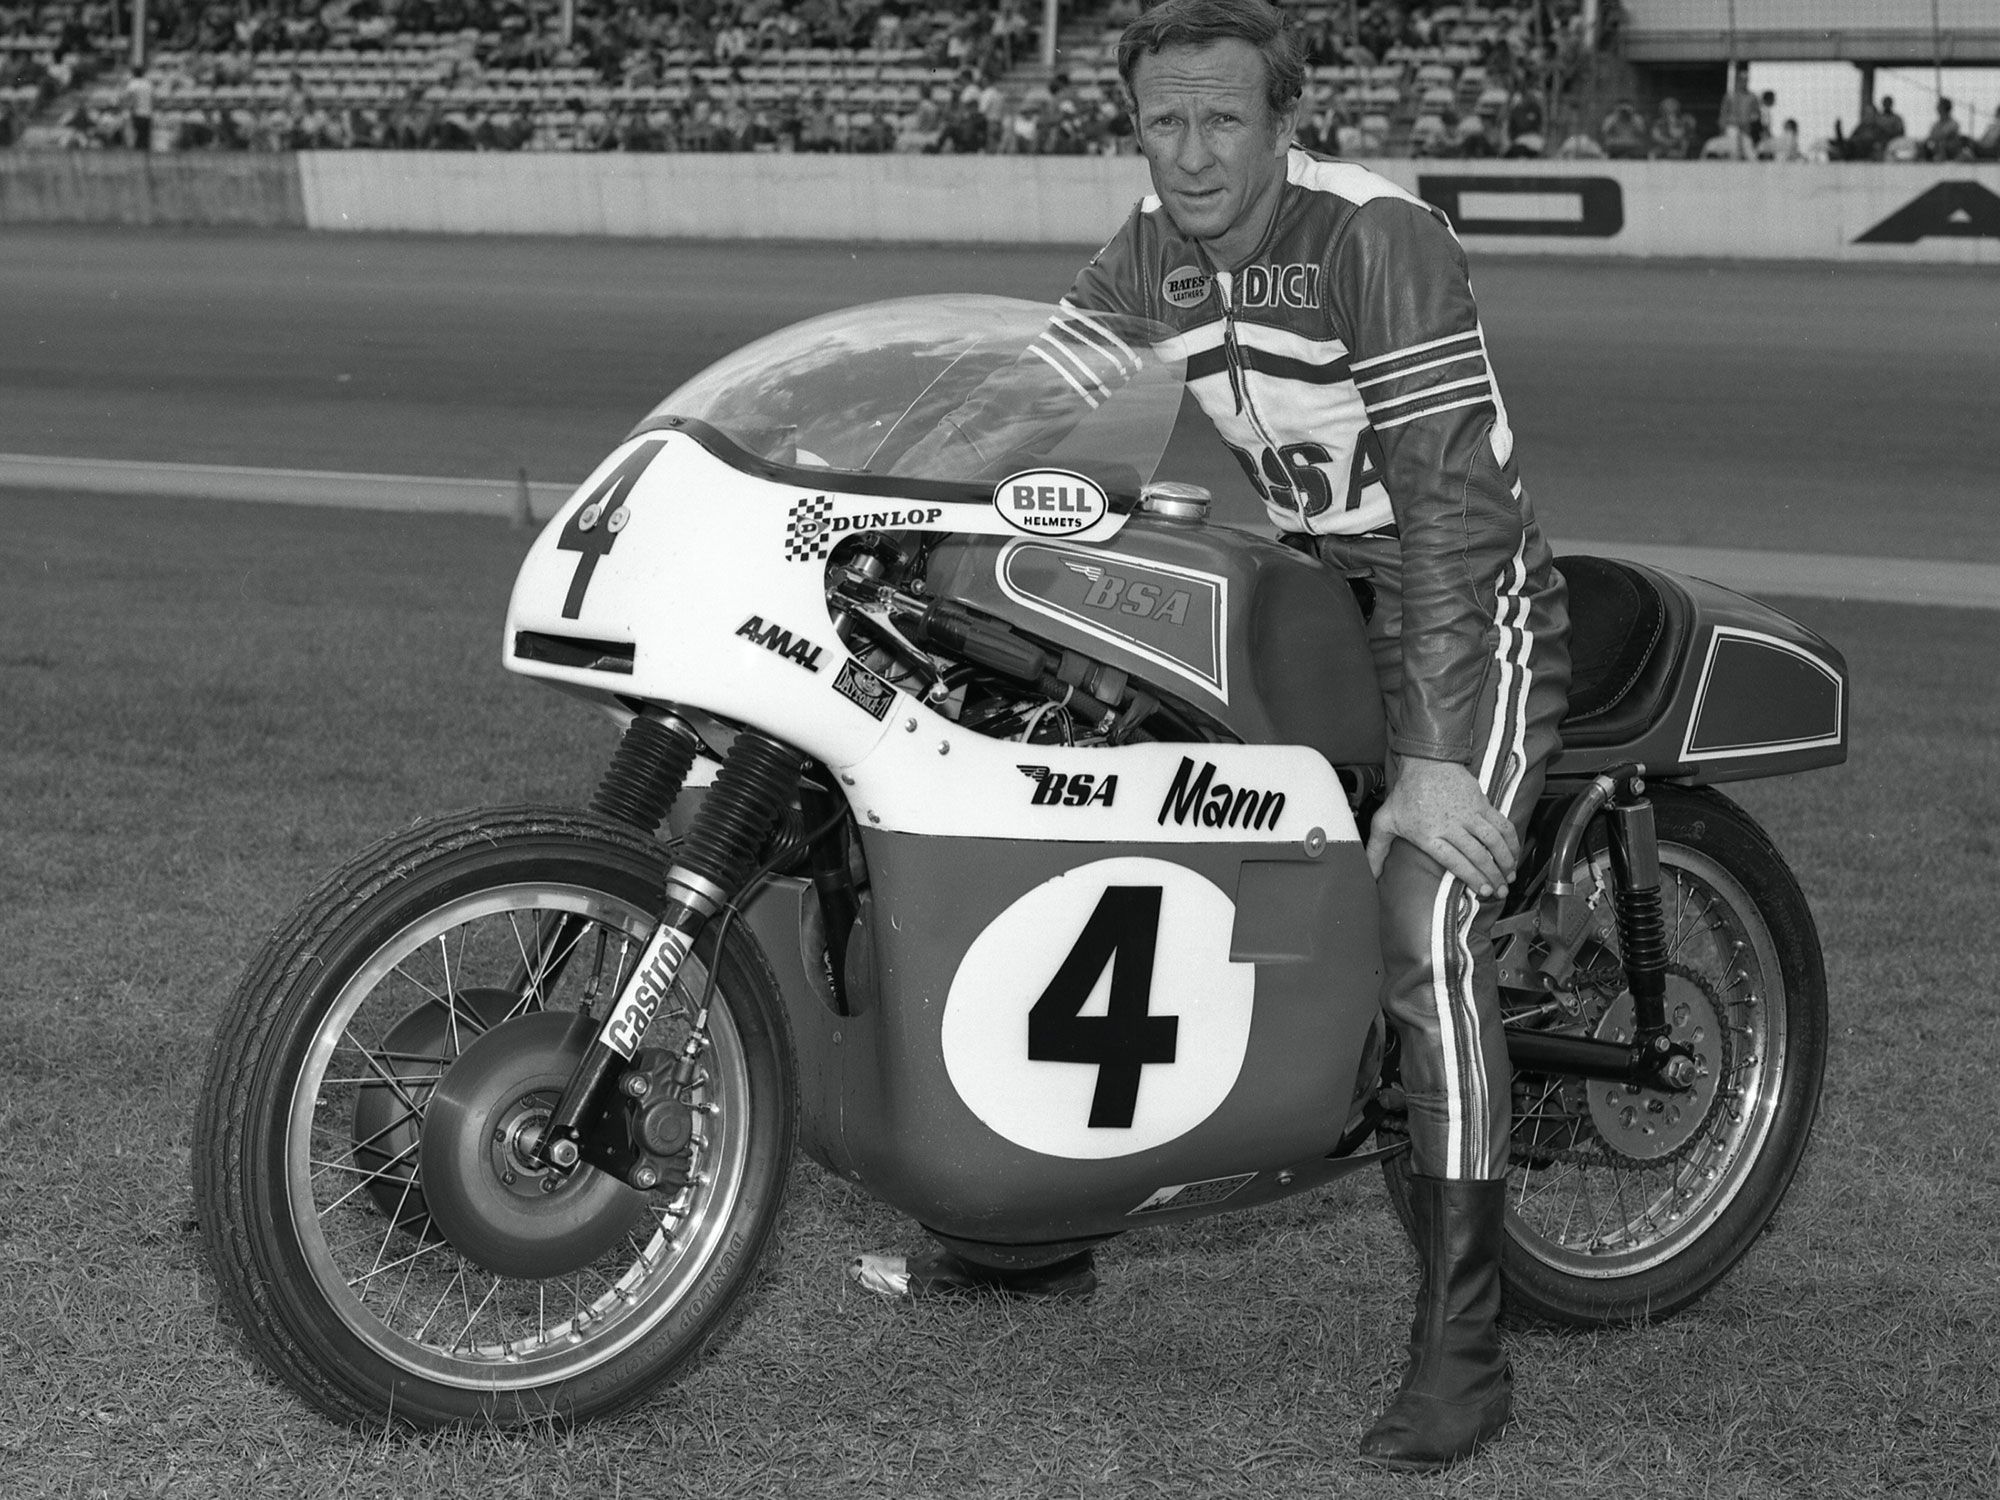 Two-time AMA Grand National Champion, Dick “Bugsy” Mann passed away on April 26th at his home near Reno, Nevada.